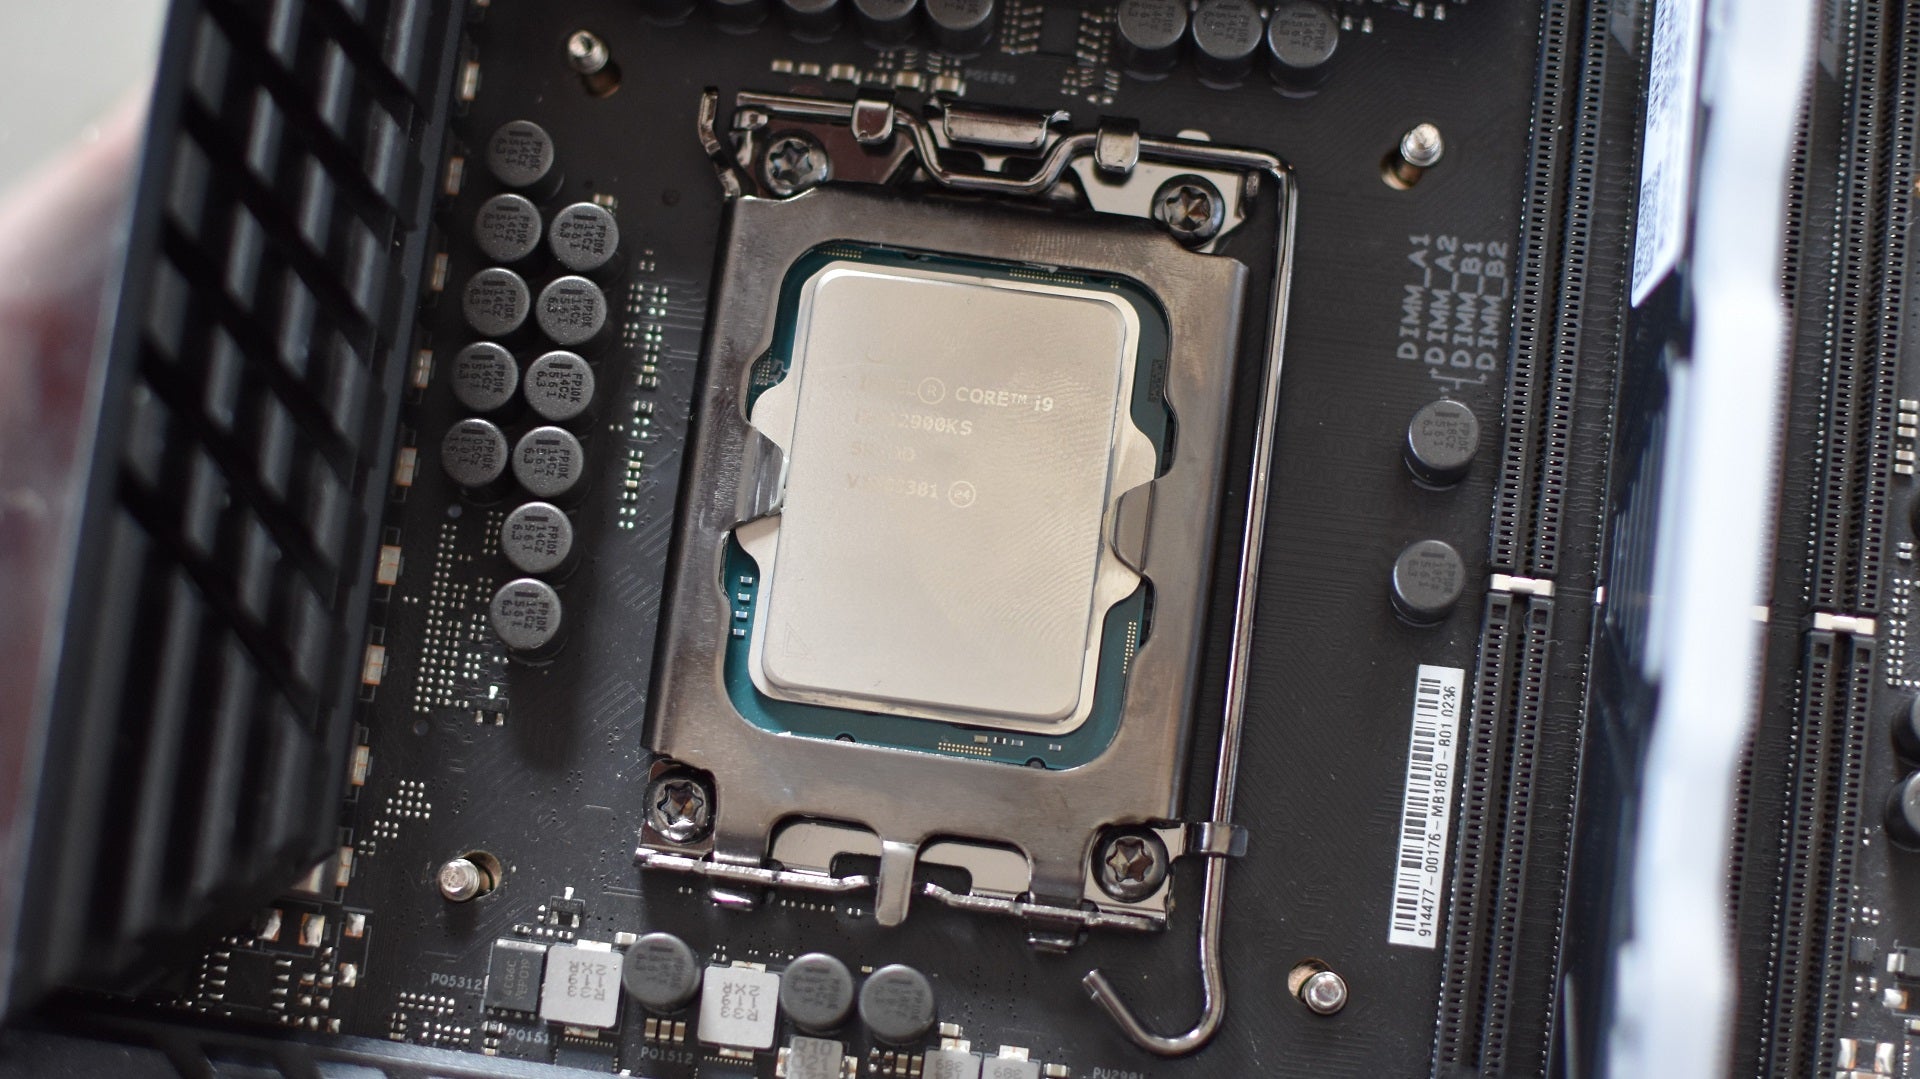 An Intel Core i9-12900KS processor installed in a motherboard.